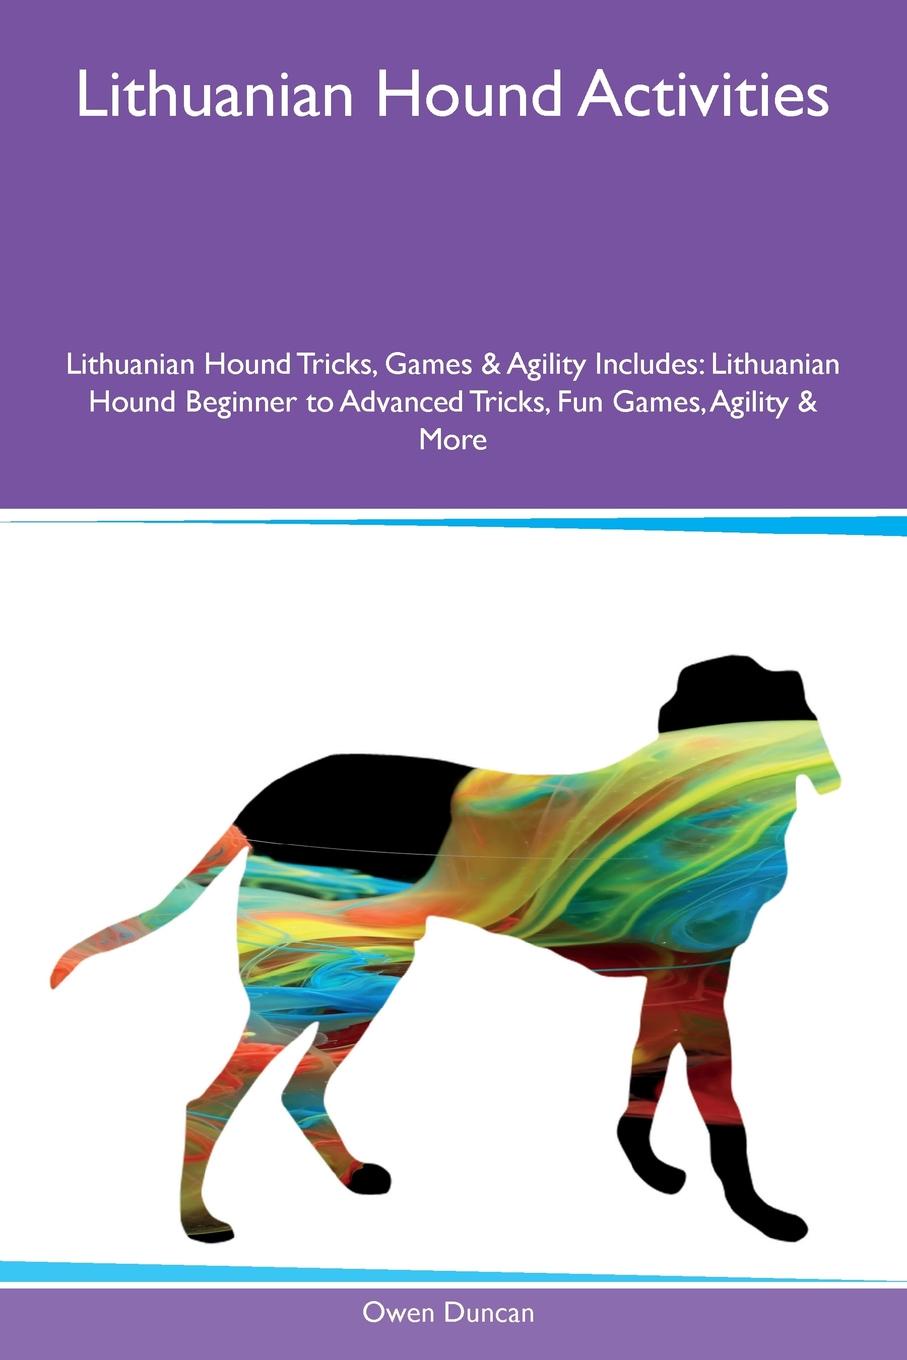 Lithuanian Hound Activities Lithuanian Hound Tricks, Games & Agility Includes. Lithuanian Hound Beginner to Advanced Tricks, Fun Games, Agility & More